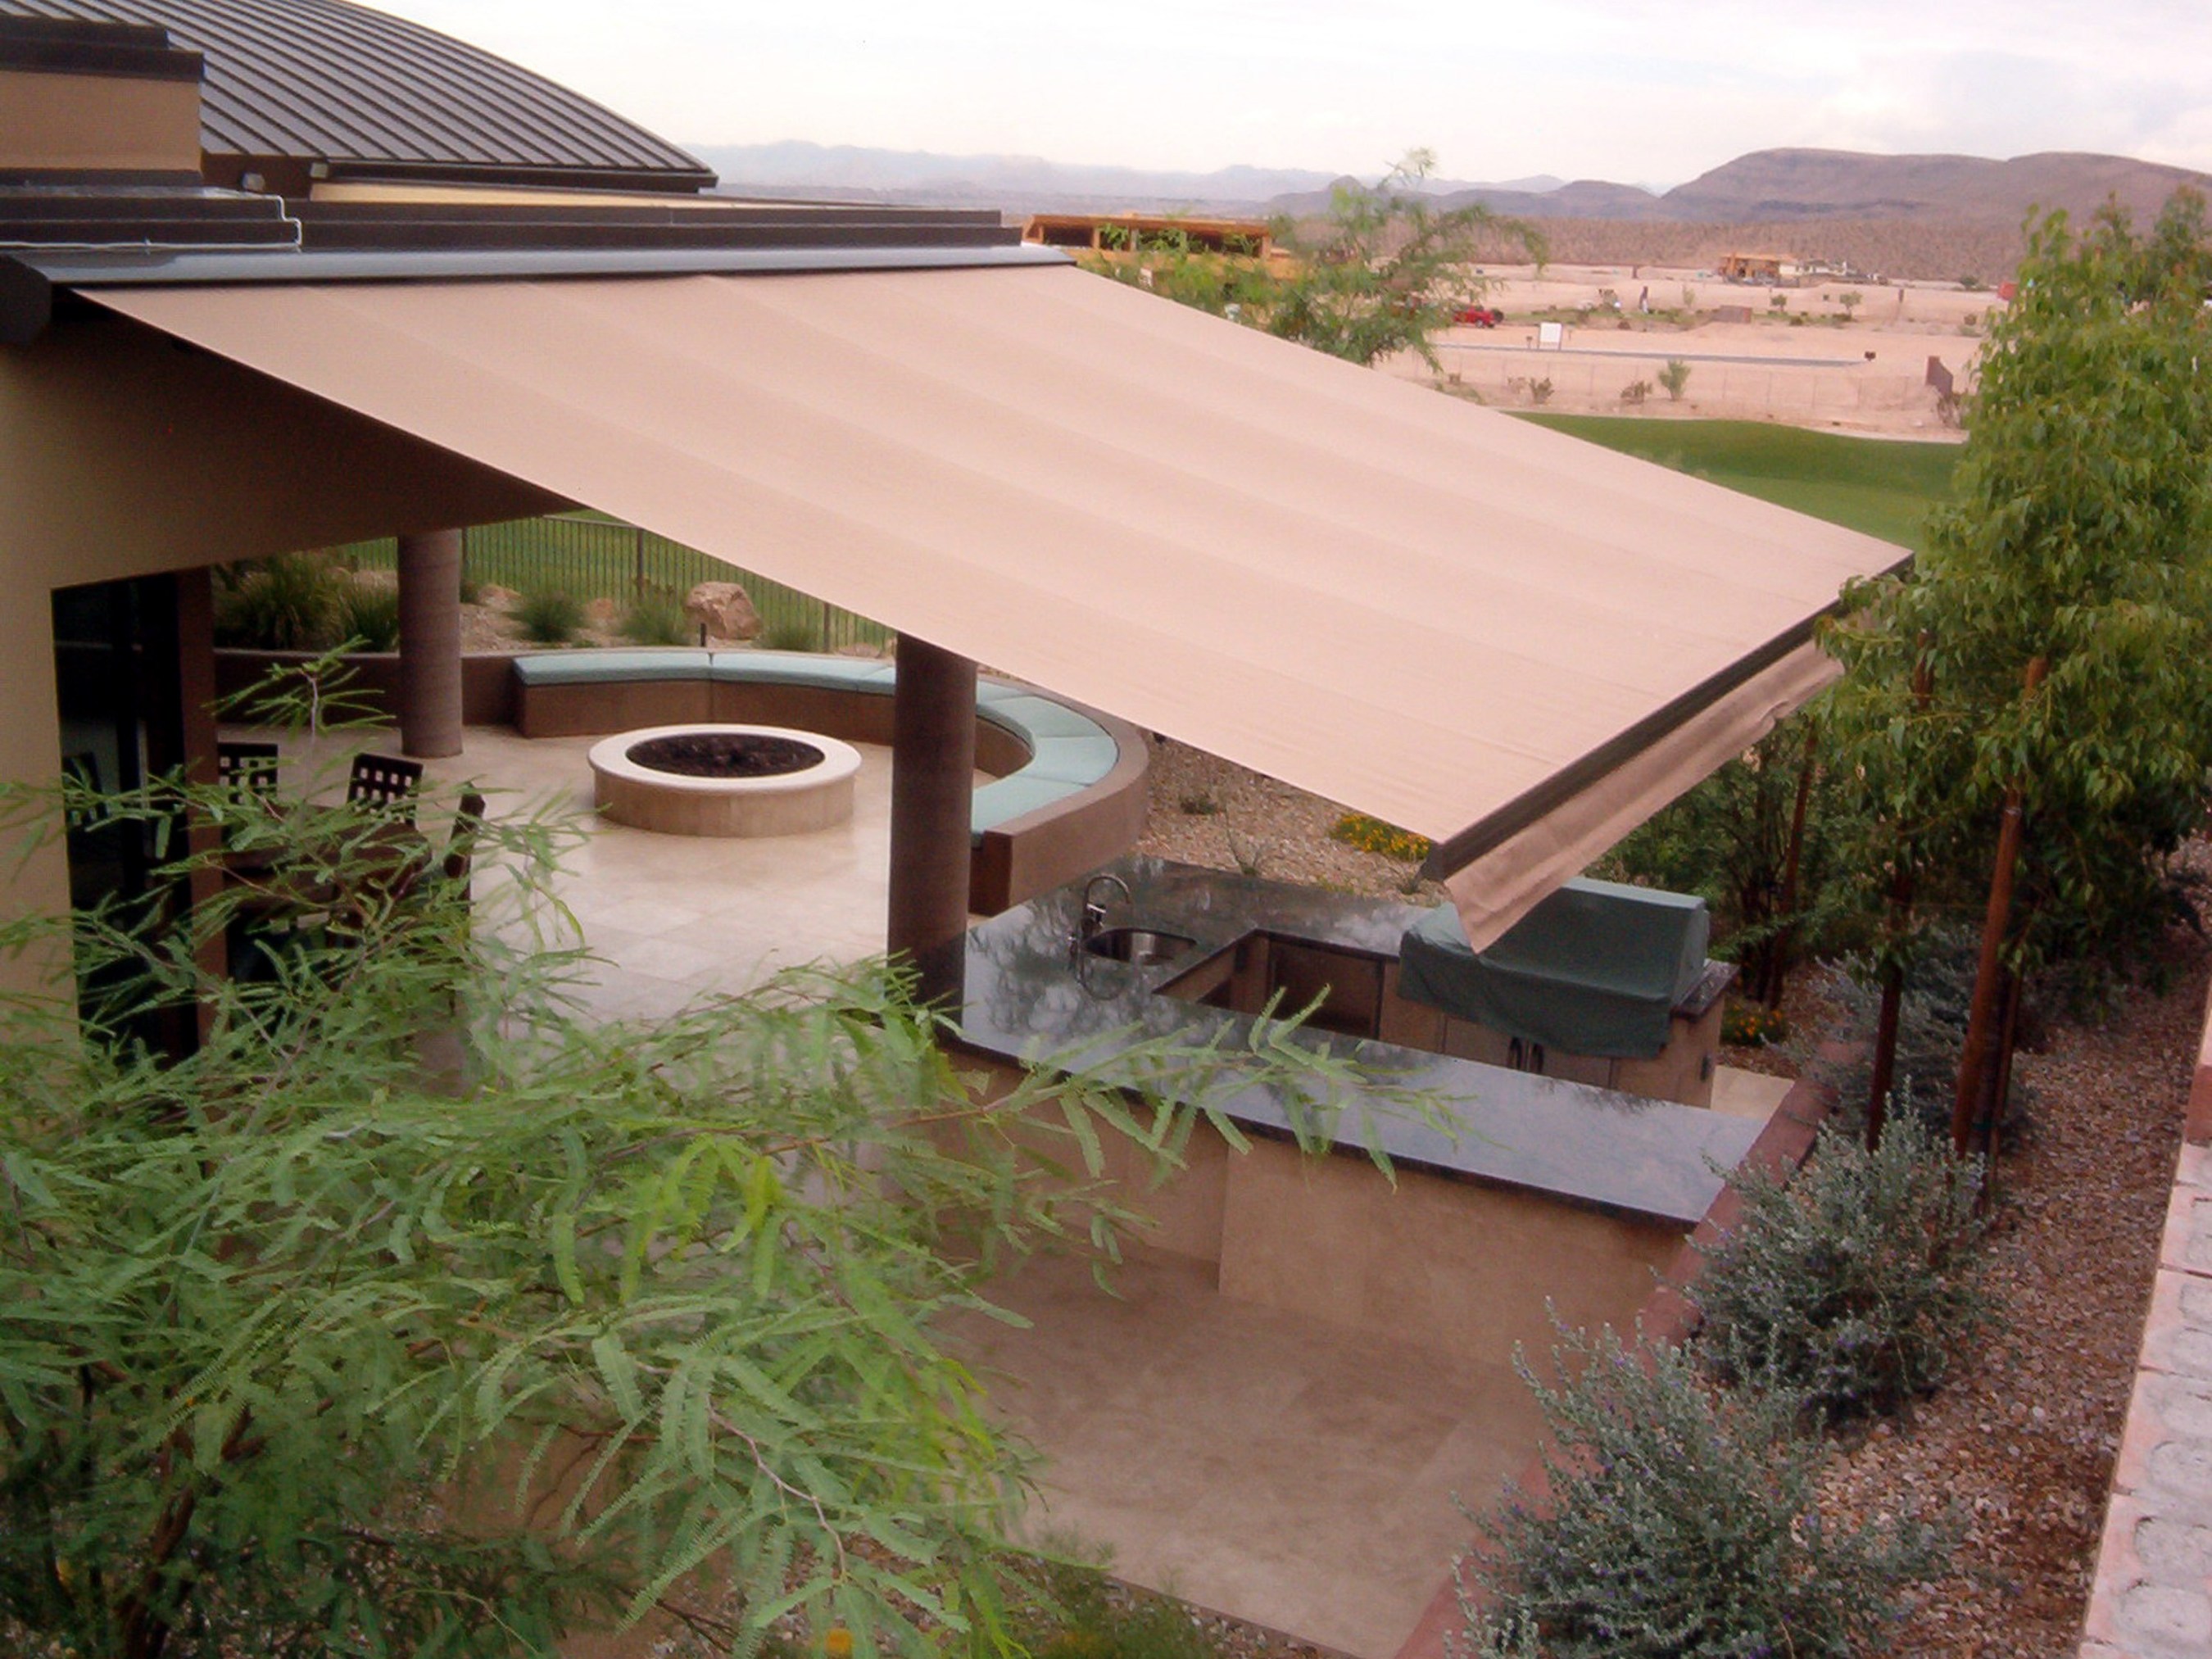 an outdoor patio using Polarshade retractable awnings